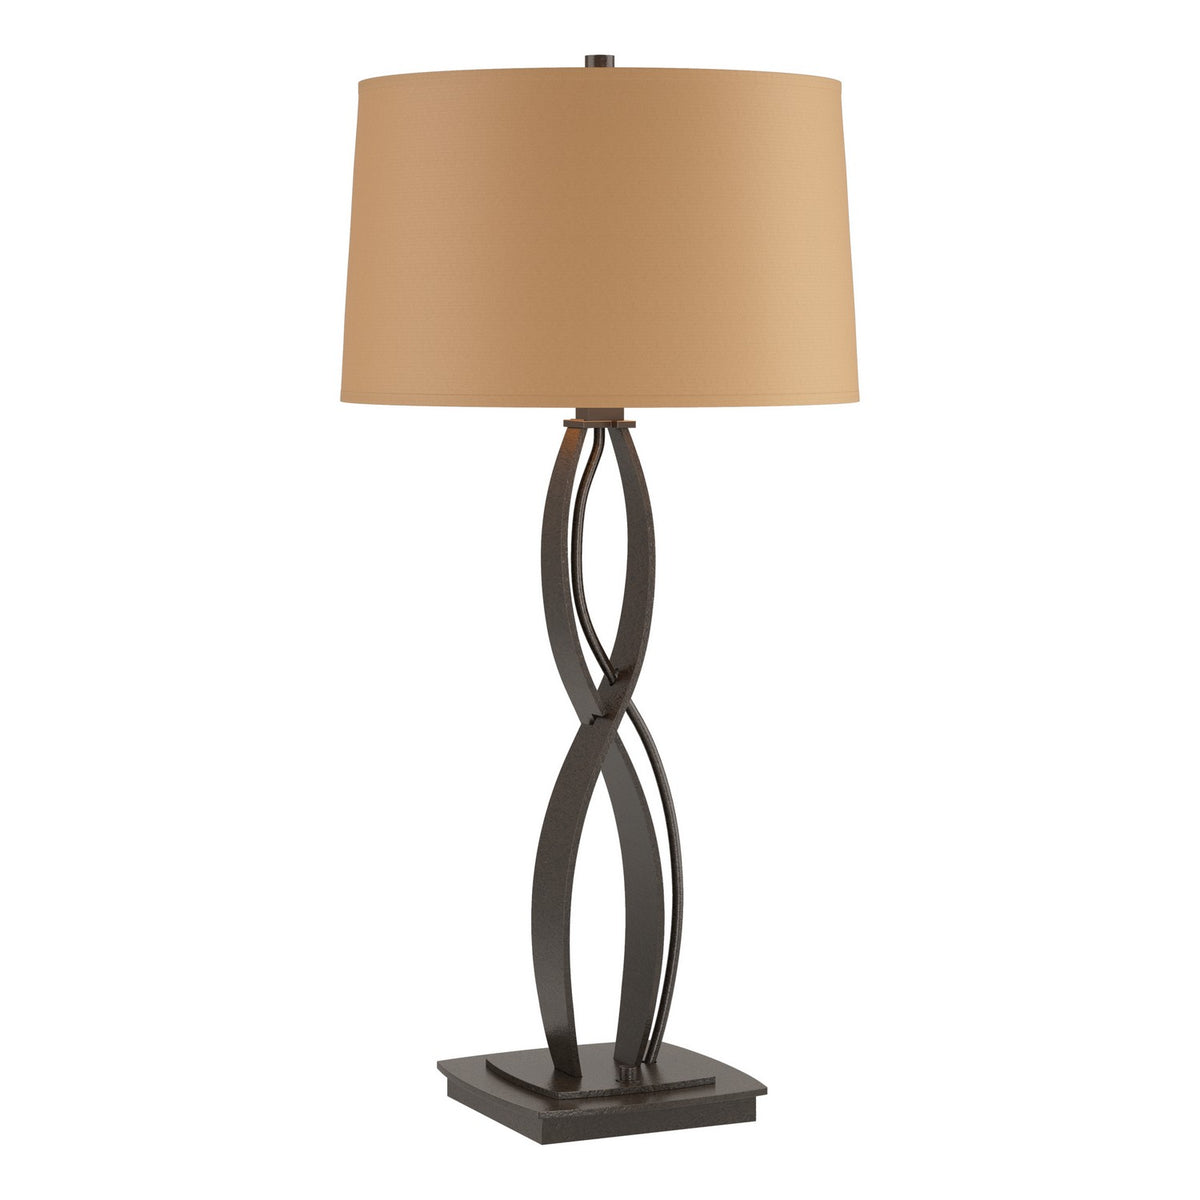 Hubbardton Forge - 272687-SKT-14-SB1594 - One Light Table Lamp - Almost Infinity - Oil Rubbed Bronze